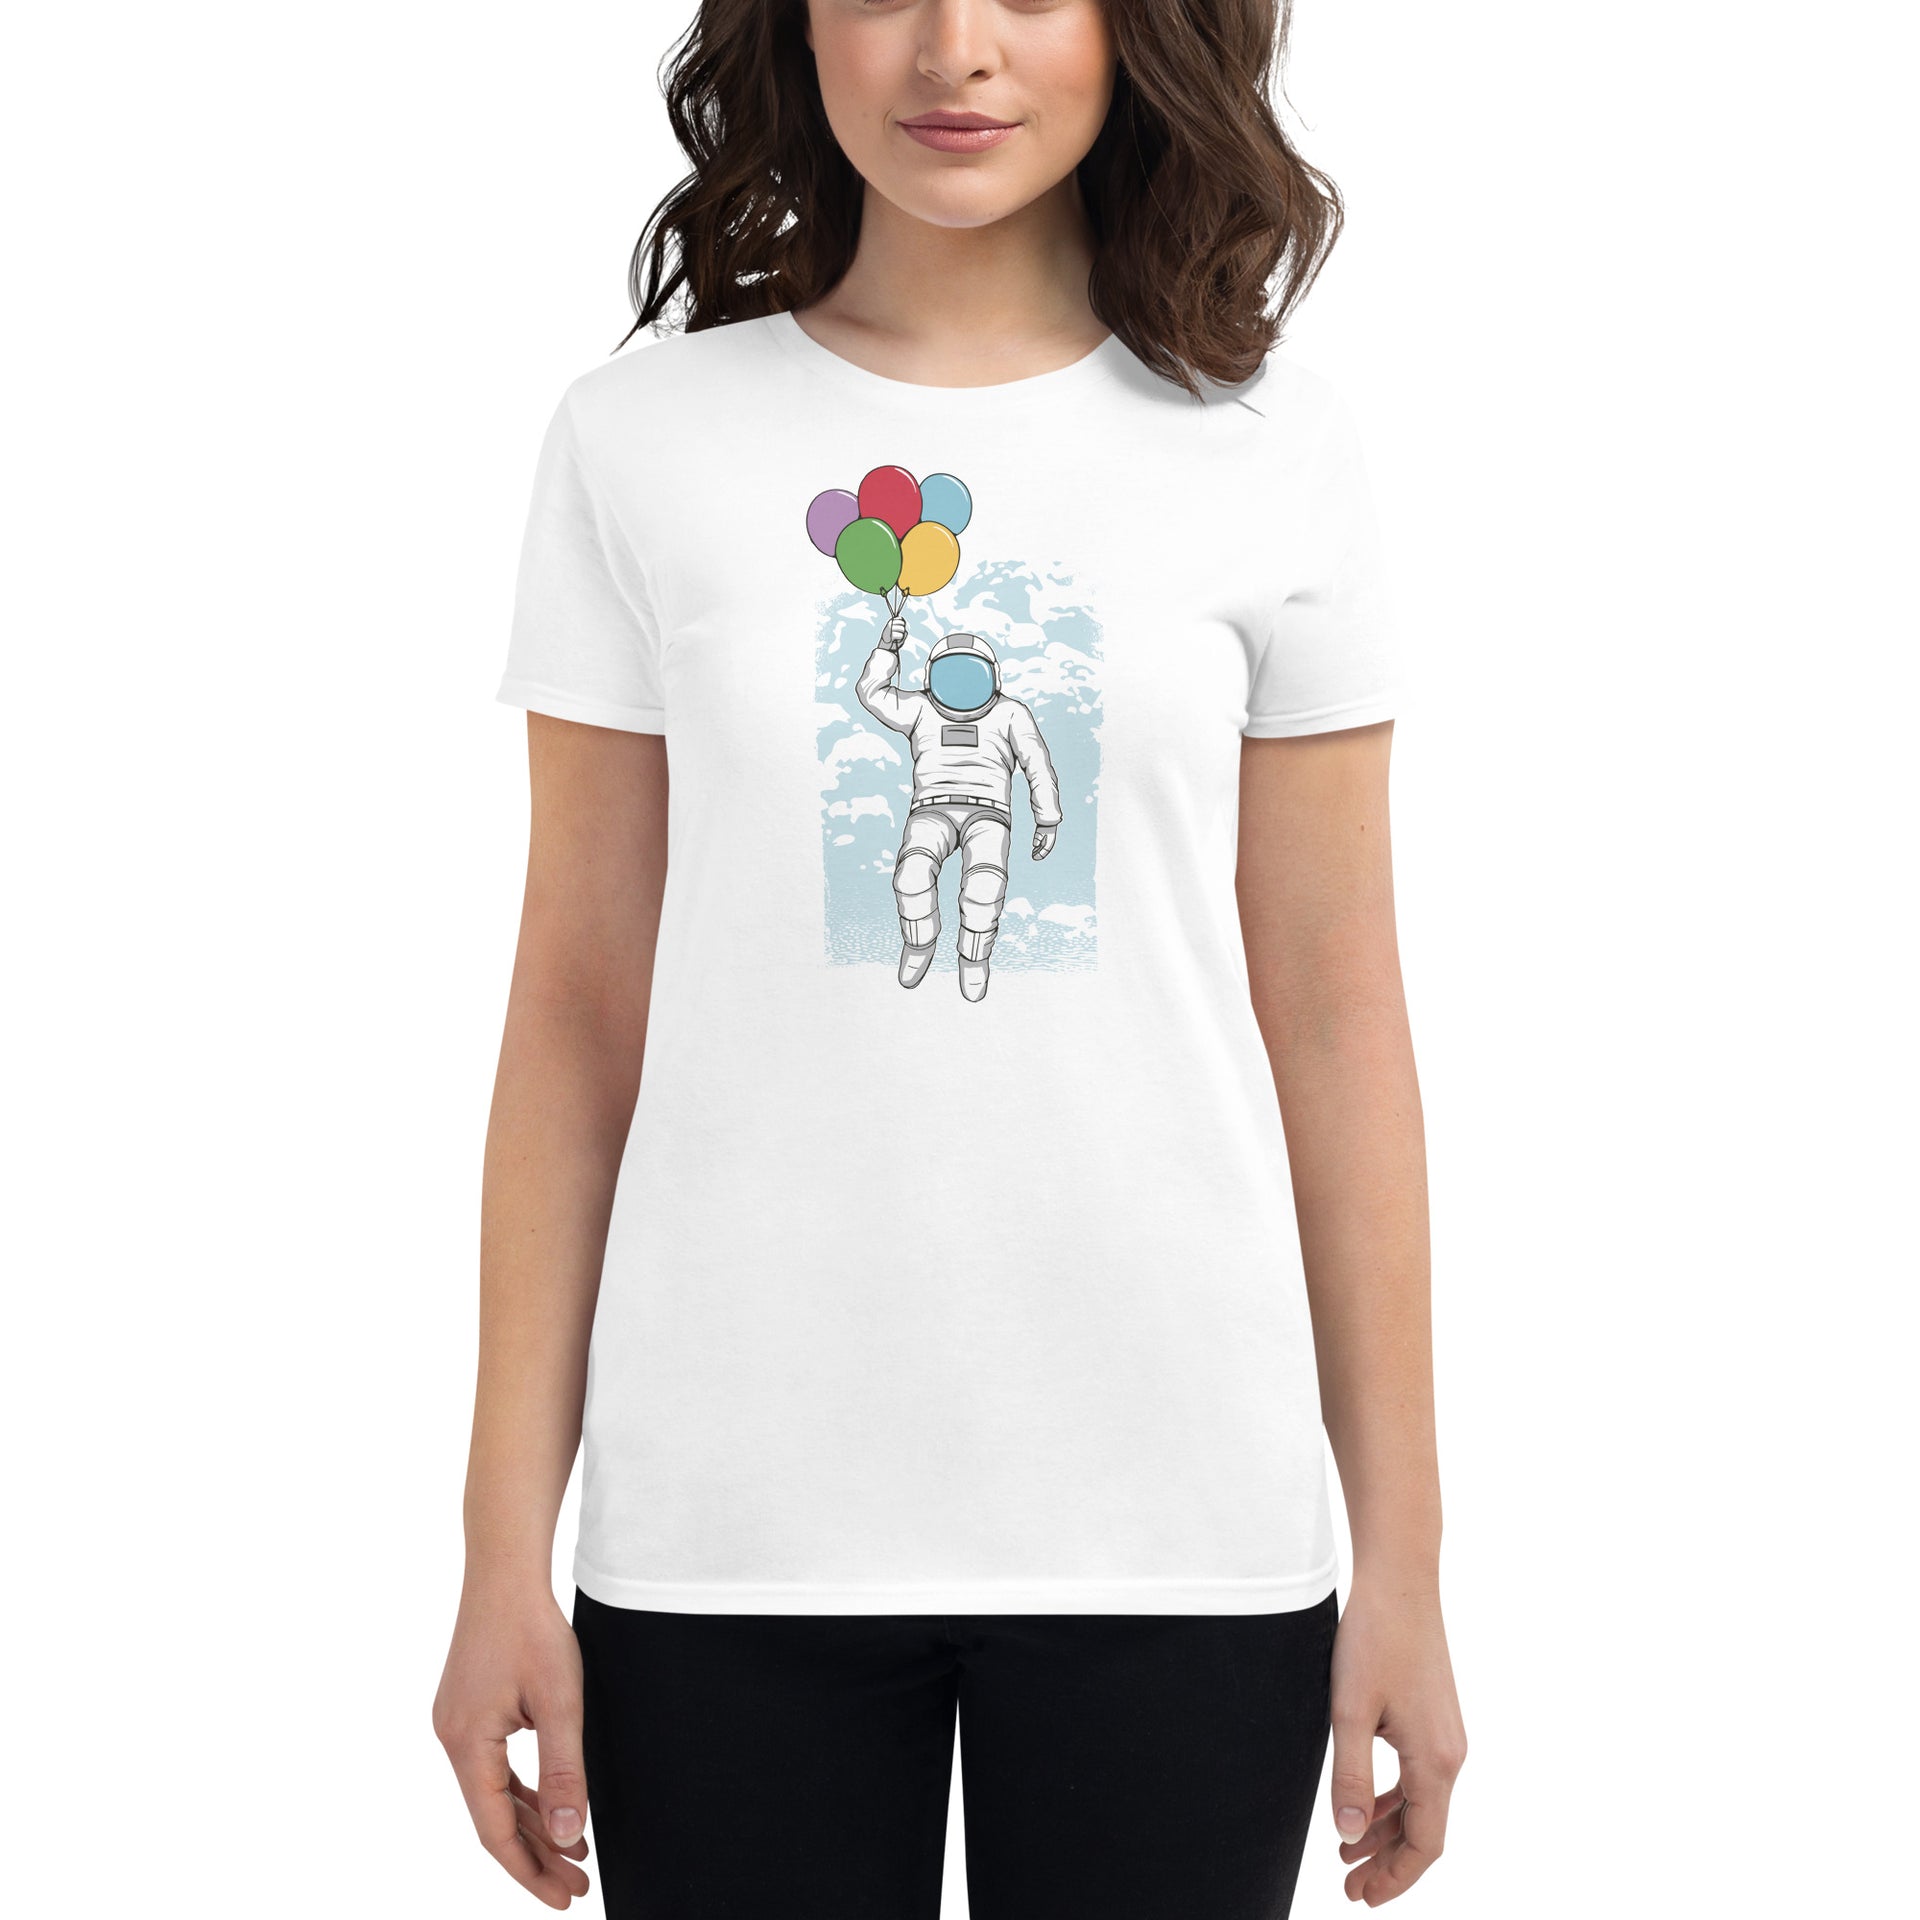 Astronaut Floating With Balloons Women's T-Shirt